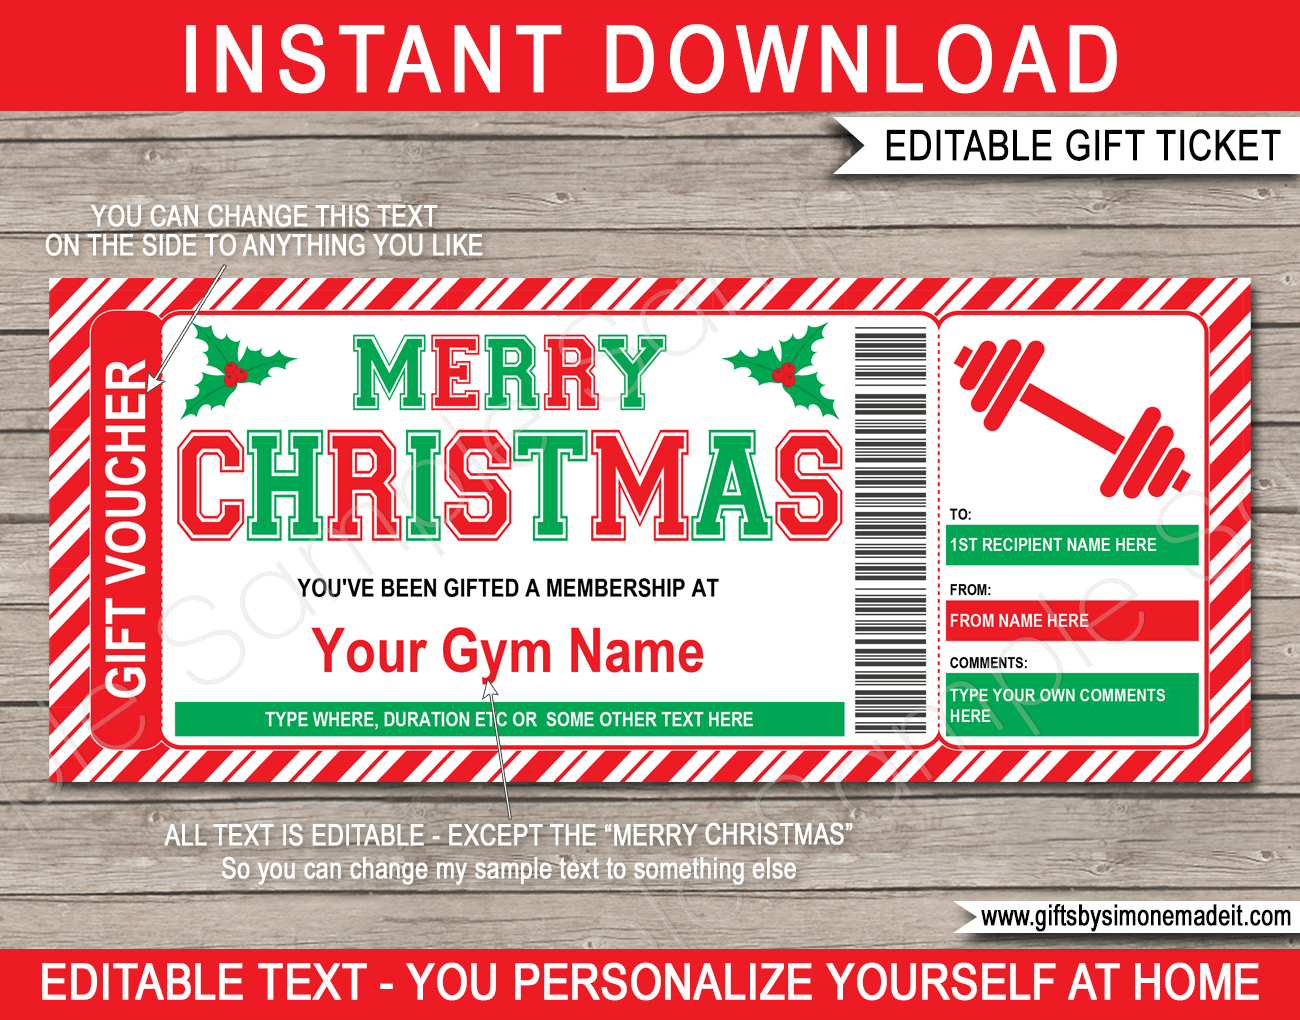 https://www.giftsbysimonemadeit.com/wp-content/uploads/2021/09/Christmas-Gym-Membership-Gift-Ticket-Template.png